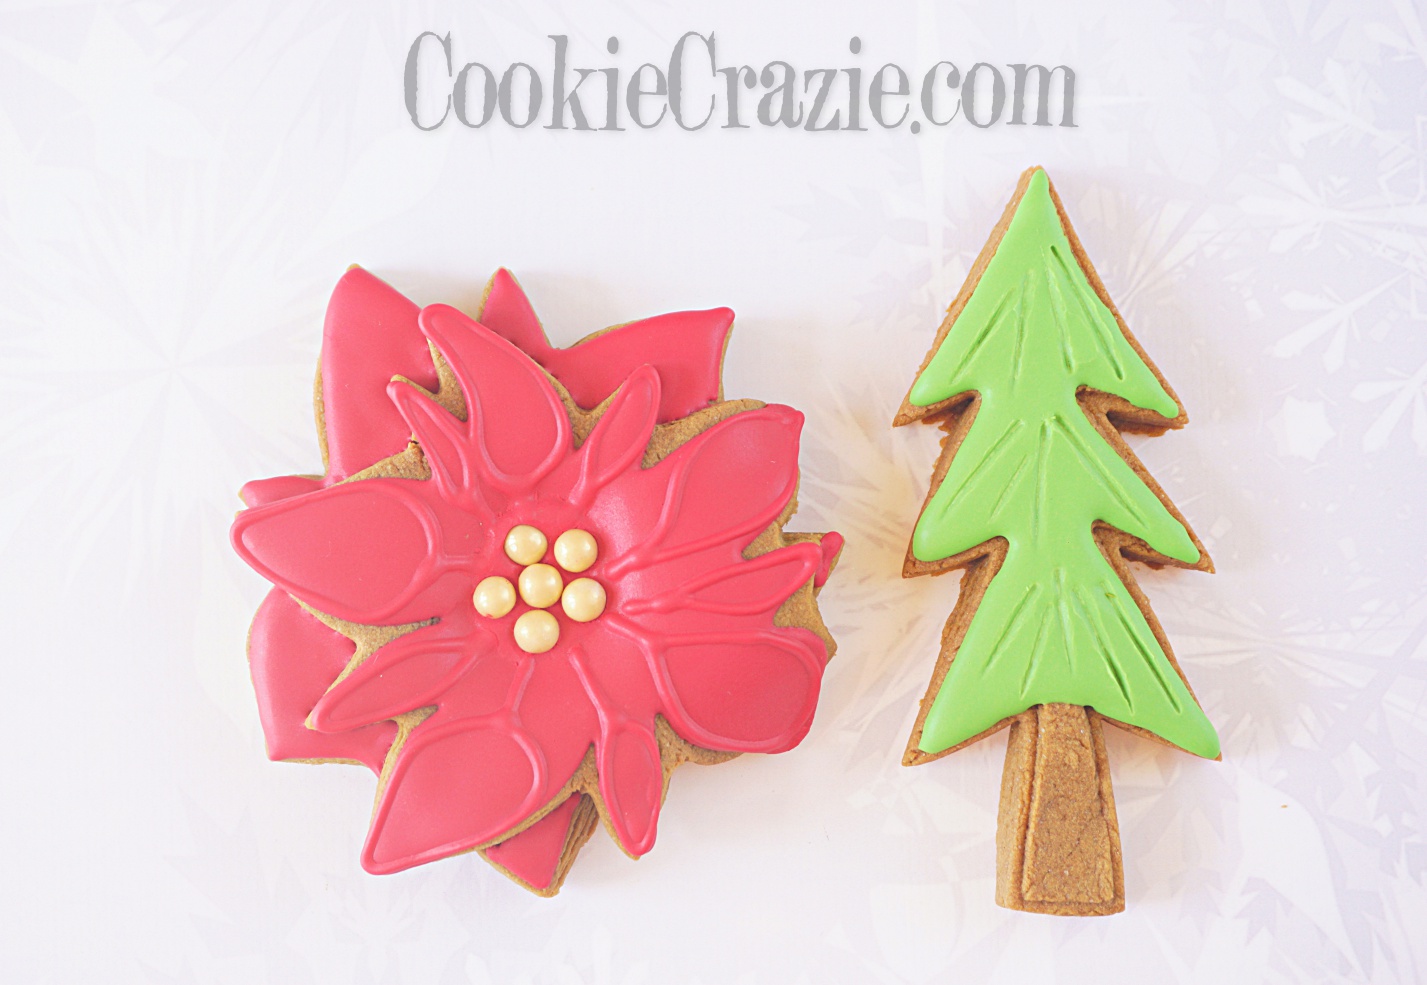  Poinsettia Decorated Sugar Cookie YouTube video  HERE  